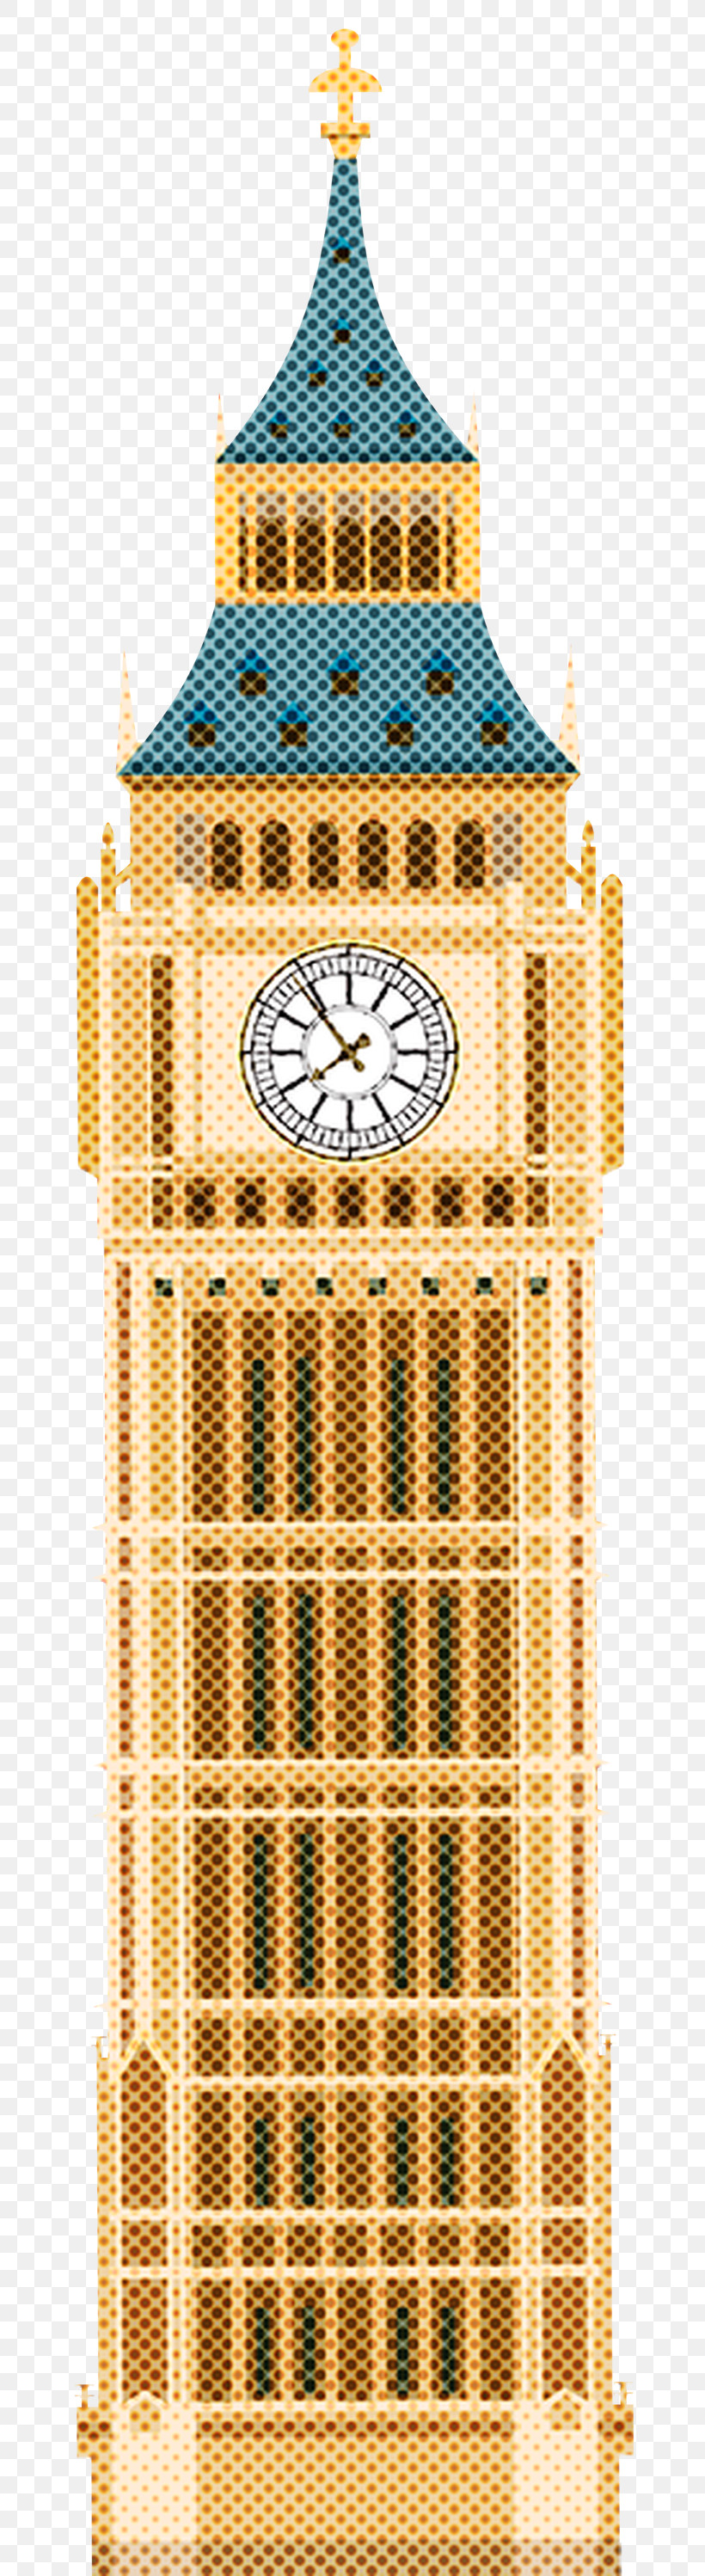 Clock Wall Clock Home Accessories Clock Tower, PNG, 704x2996px, Clock, Clock Tower, Home Accessories, Wall Clock Download Free